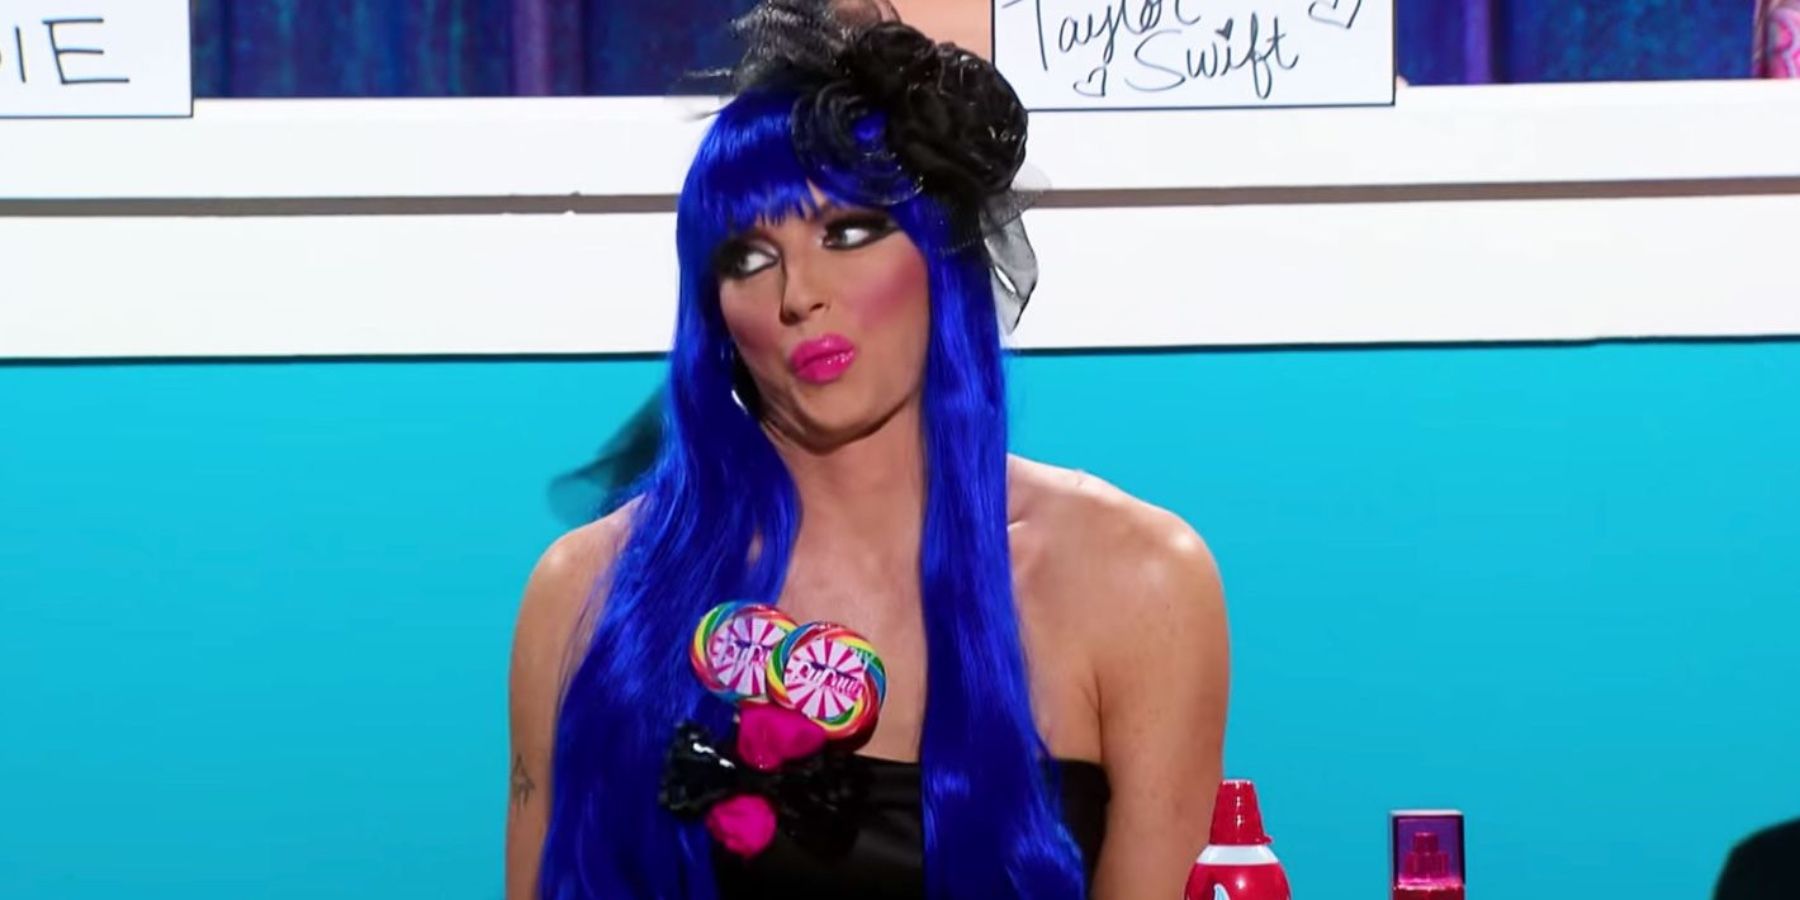 10 Things RuPaul’s Drag Race Used To Do That It Should Bring Back